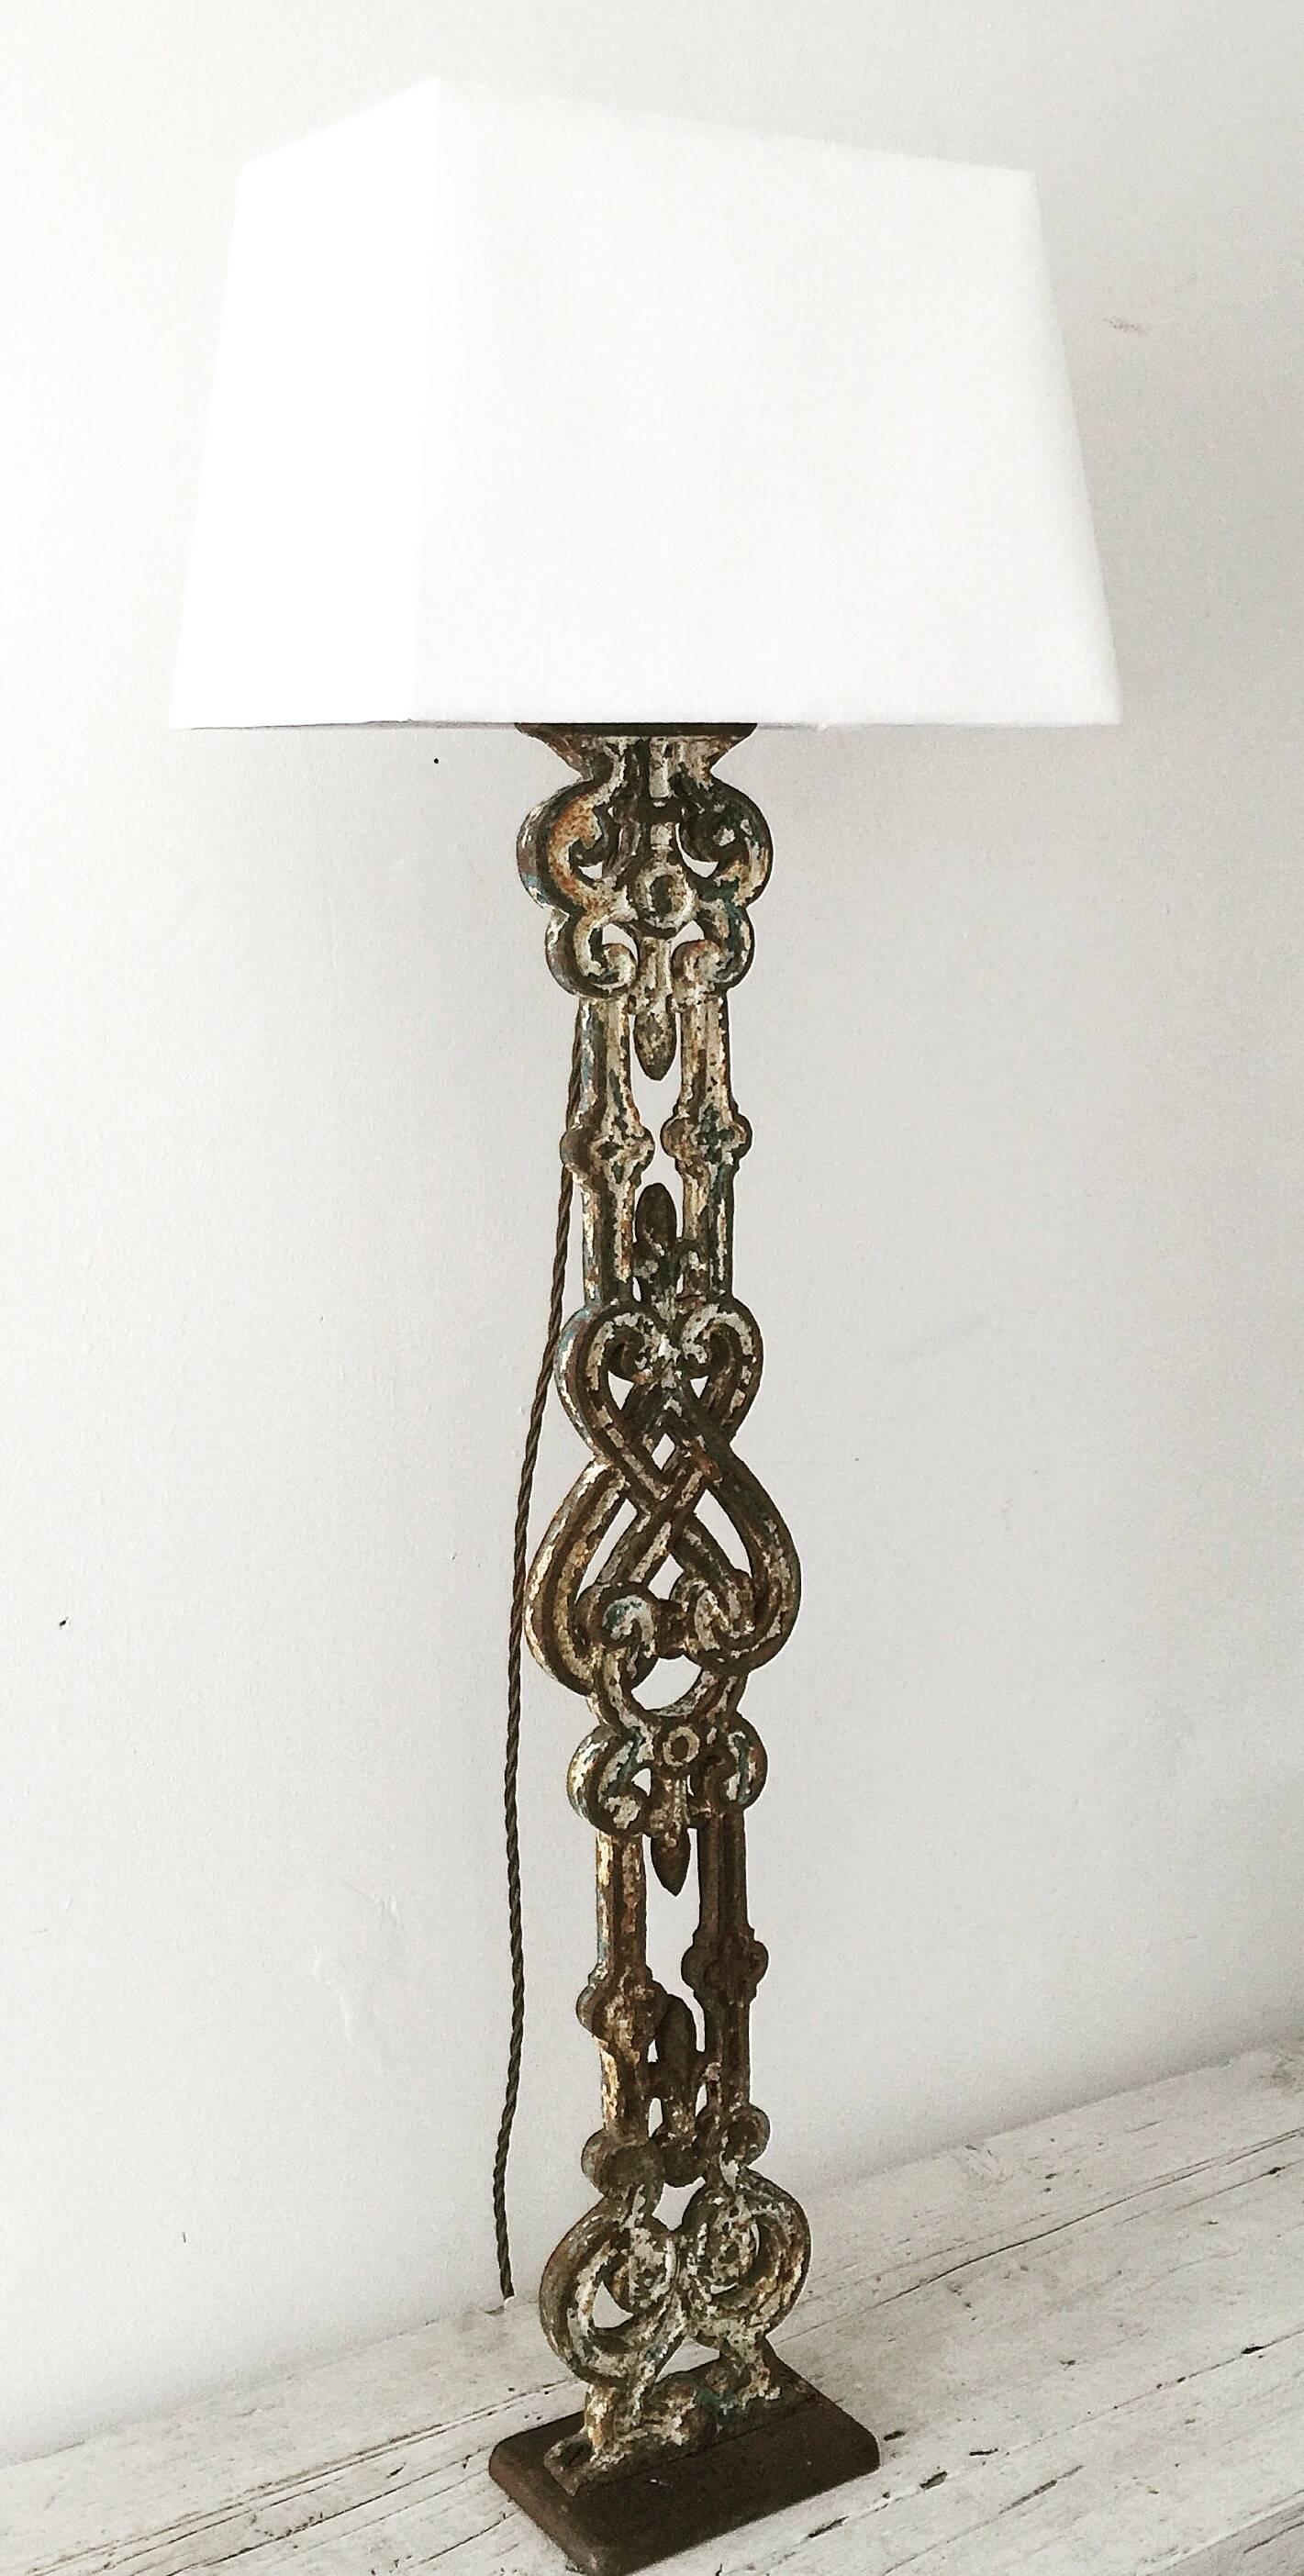 Large 19th century cast iron balustrade converted into a table lamp mounted onto a cast iron base with brass fittings and lampshade.